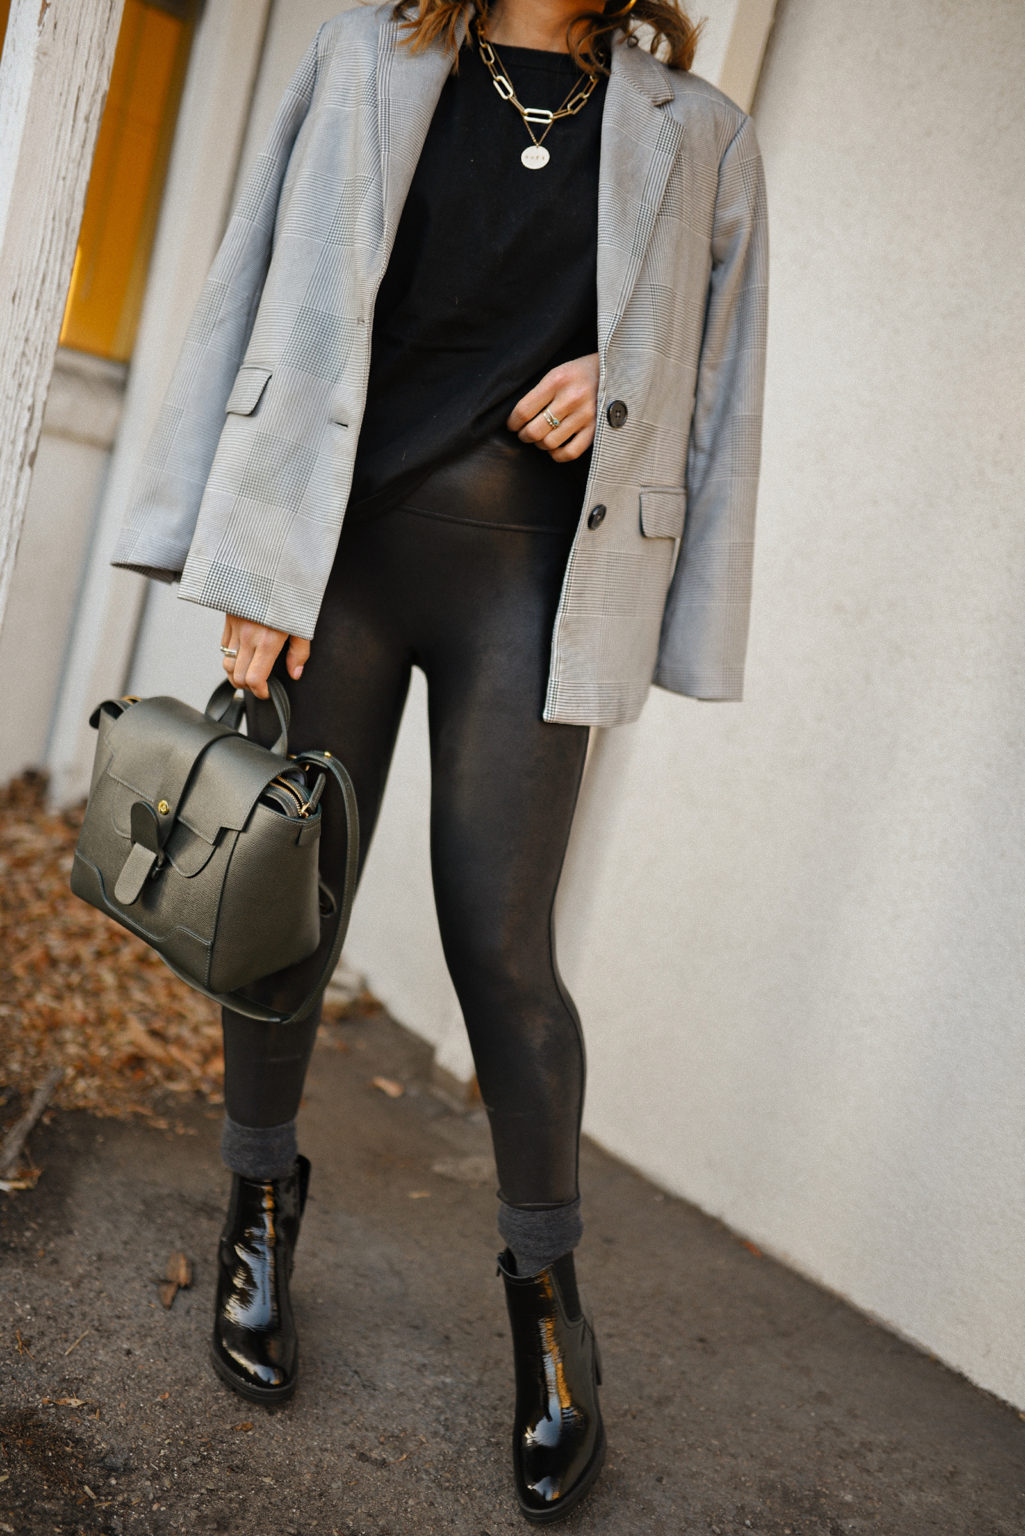 A COMFY AND CHIC LOOK WITH FAUX LEATHER LEGGINGS - CHIC TALK | CHIC TALK